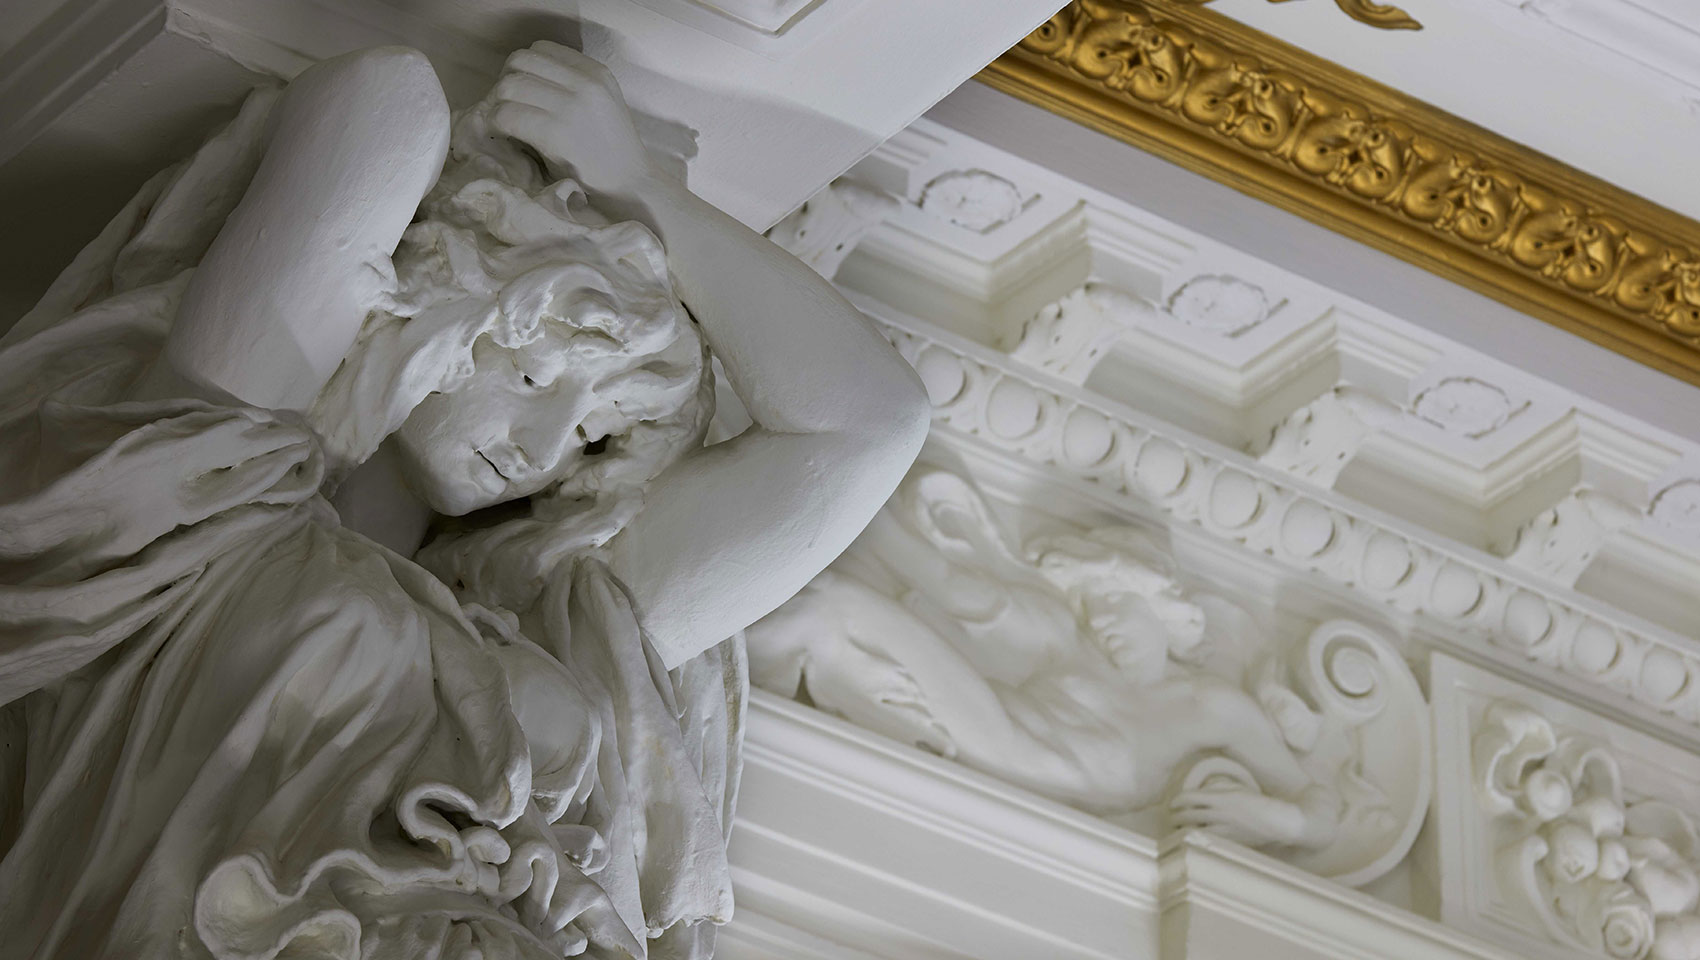 It's In The Details - Inside Our Grand Ballroom